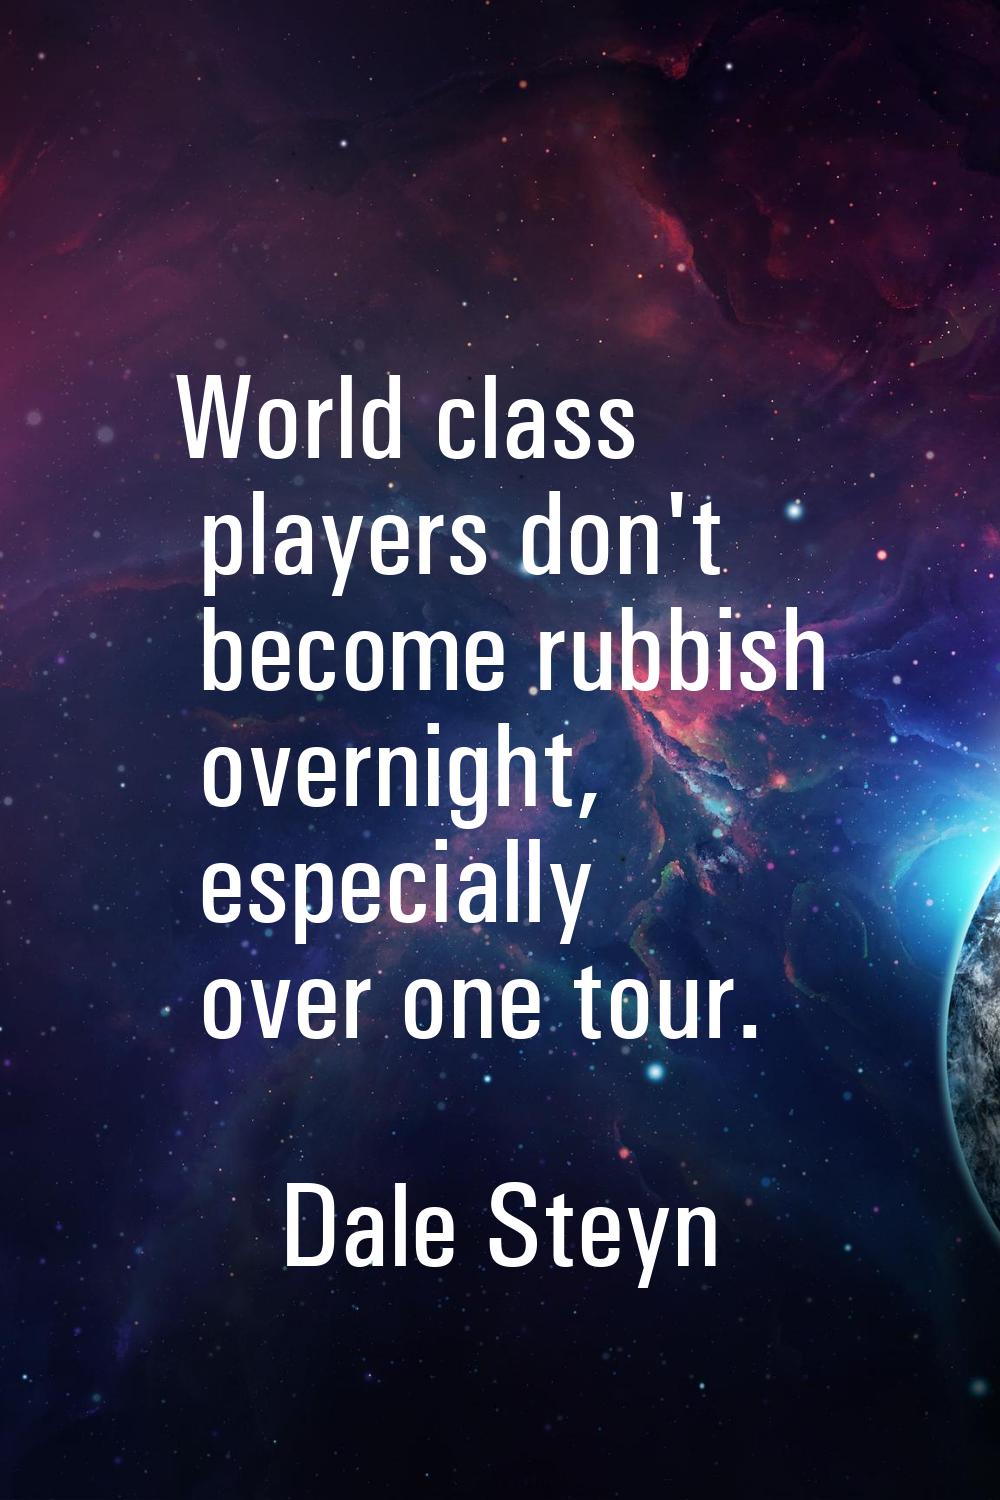 World class players don't become rubbish overnight, especially over one tour.